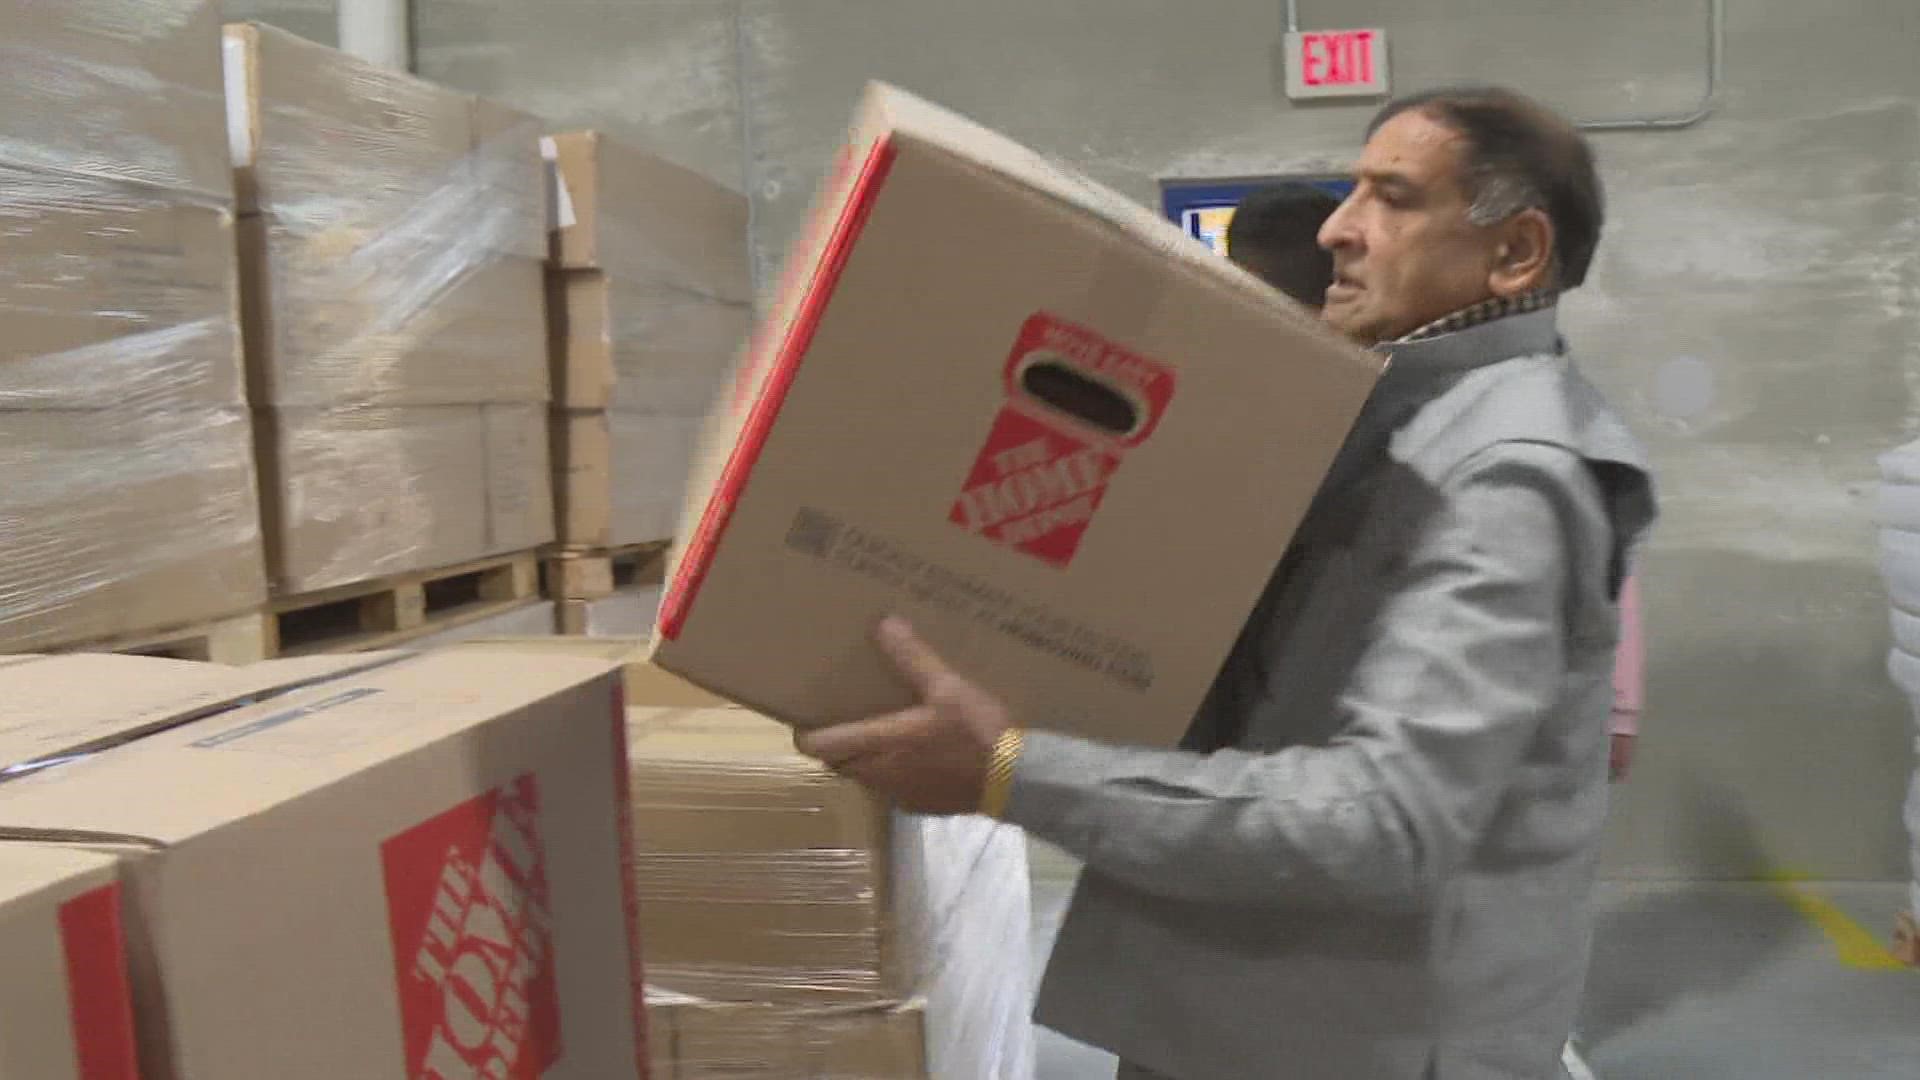 The hope is that what Hoosiers are sending in the boxes, can alleviate some of the pain Pakistanis are feeling in the wake of devastating flooding.